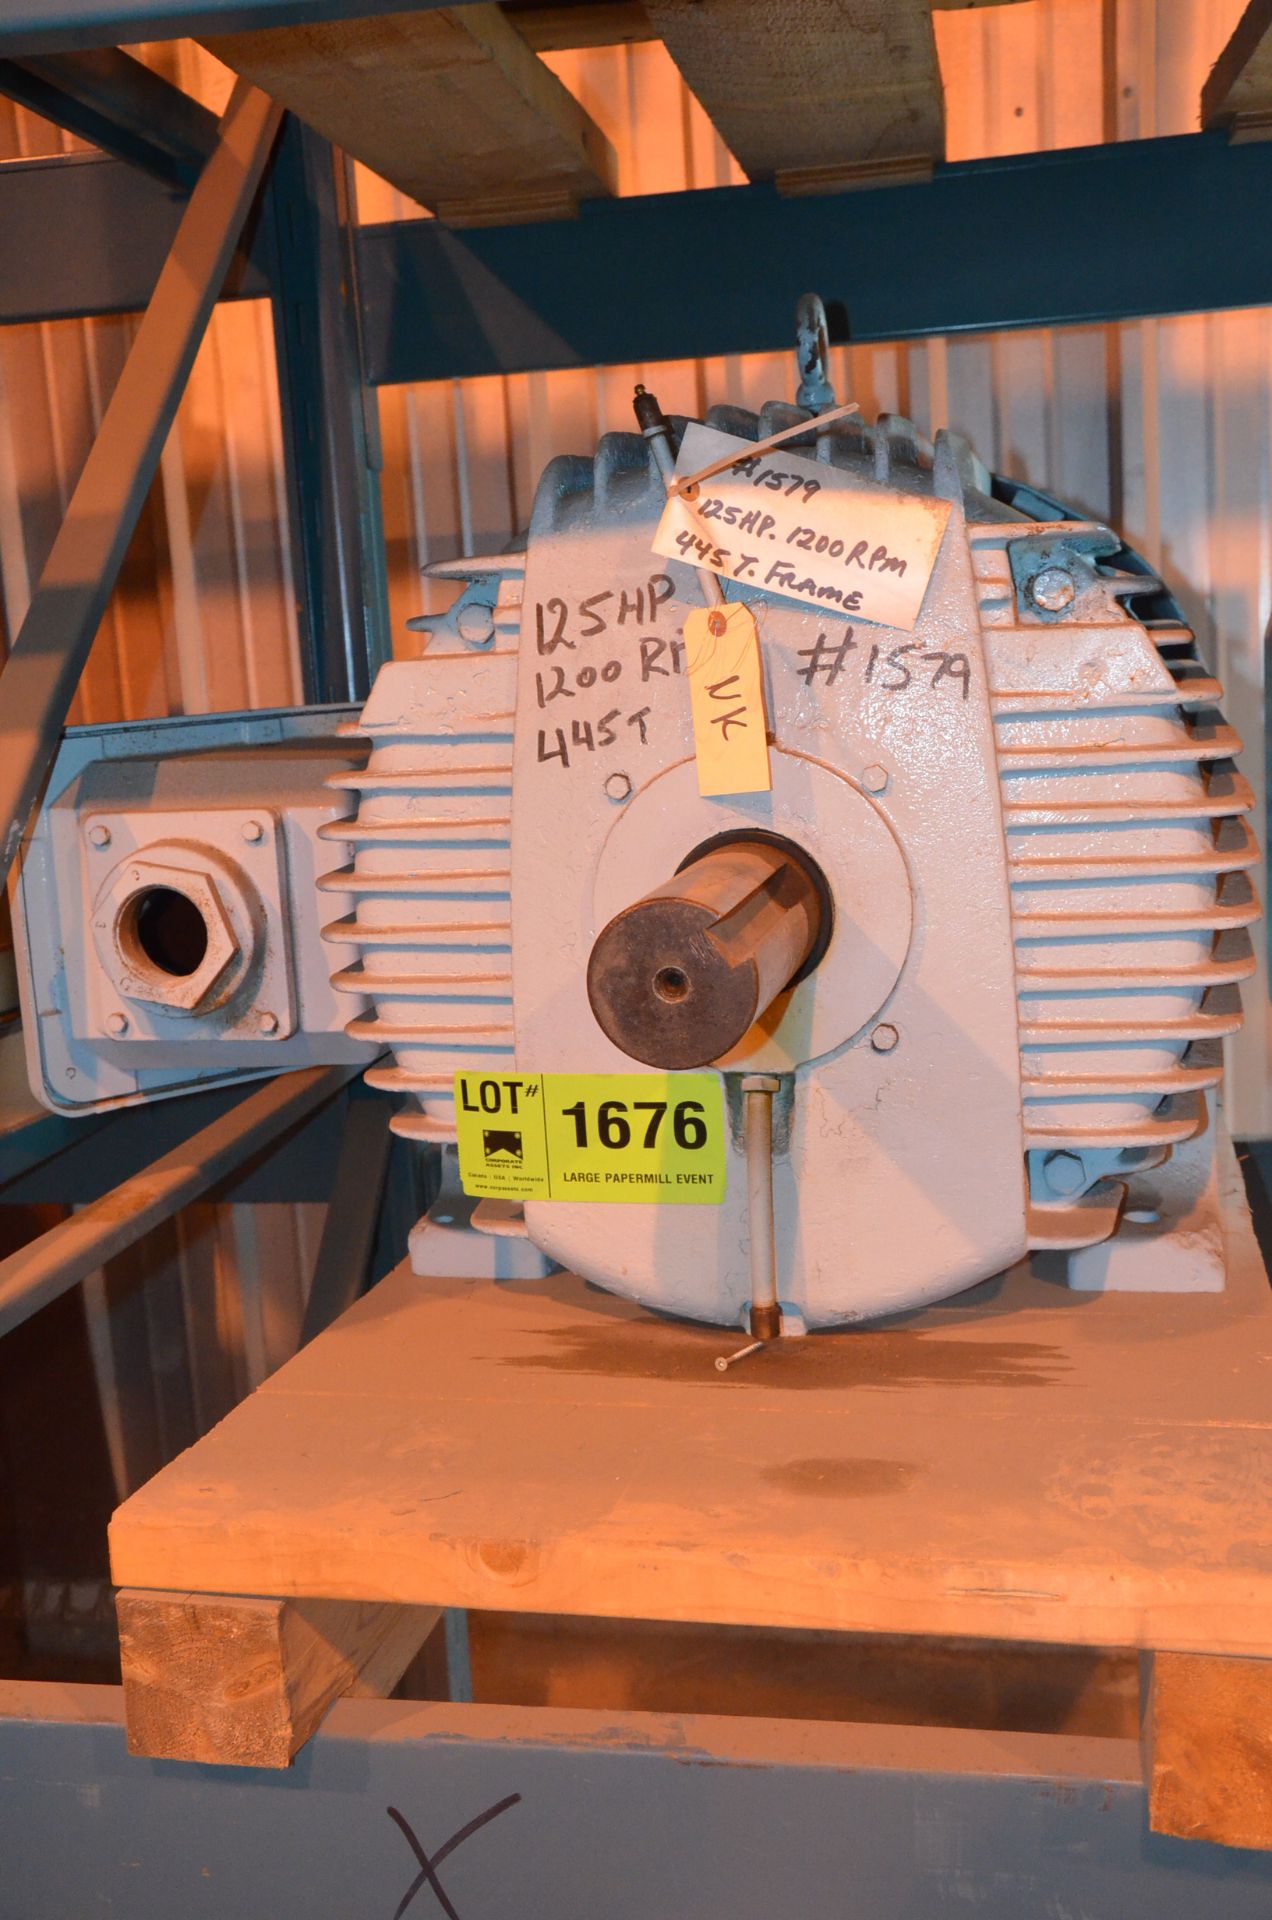 GE 125HP/1200RPM/575V ELECTRIC MOTOR, S/N N/A [RIGGING FEES FOR LOT #1676 - $60 USD PLUS